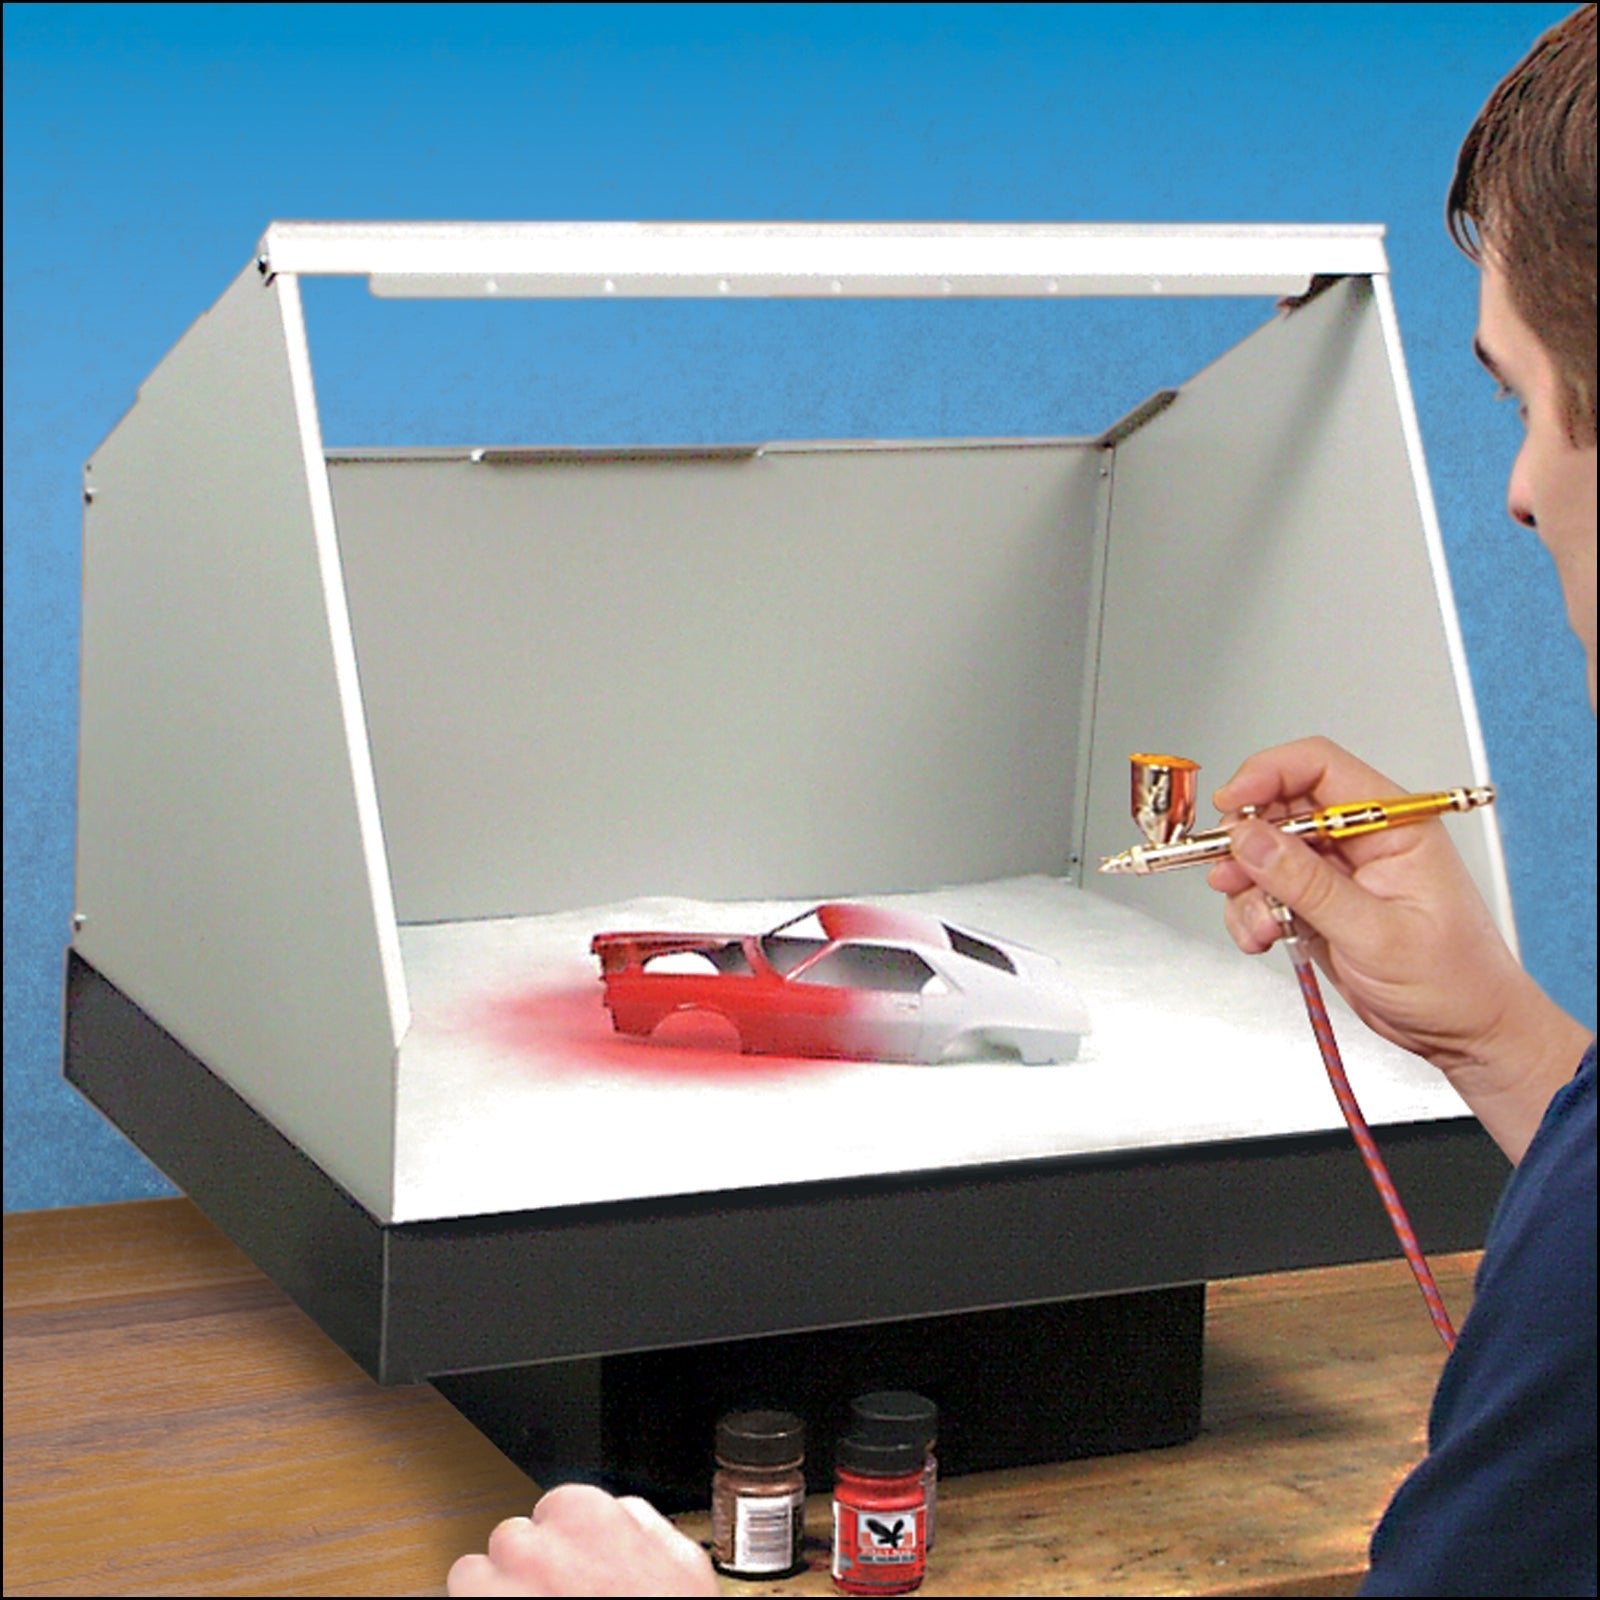 15 Inch x 20 Inch Standard Spray Paint Booth - Micro - Mark Airbrush Accessories